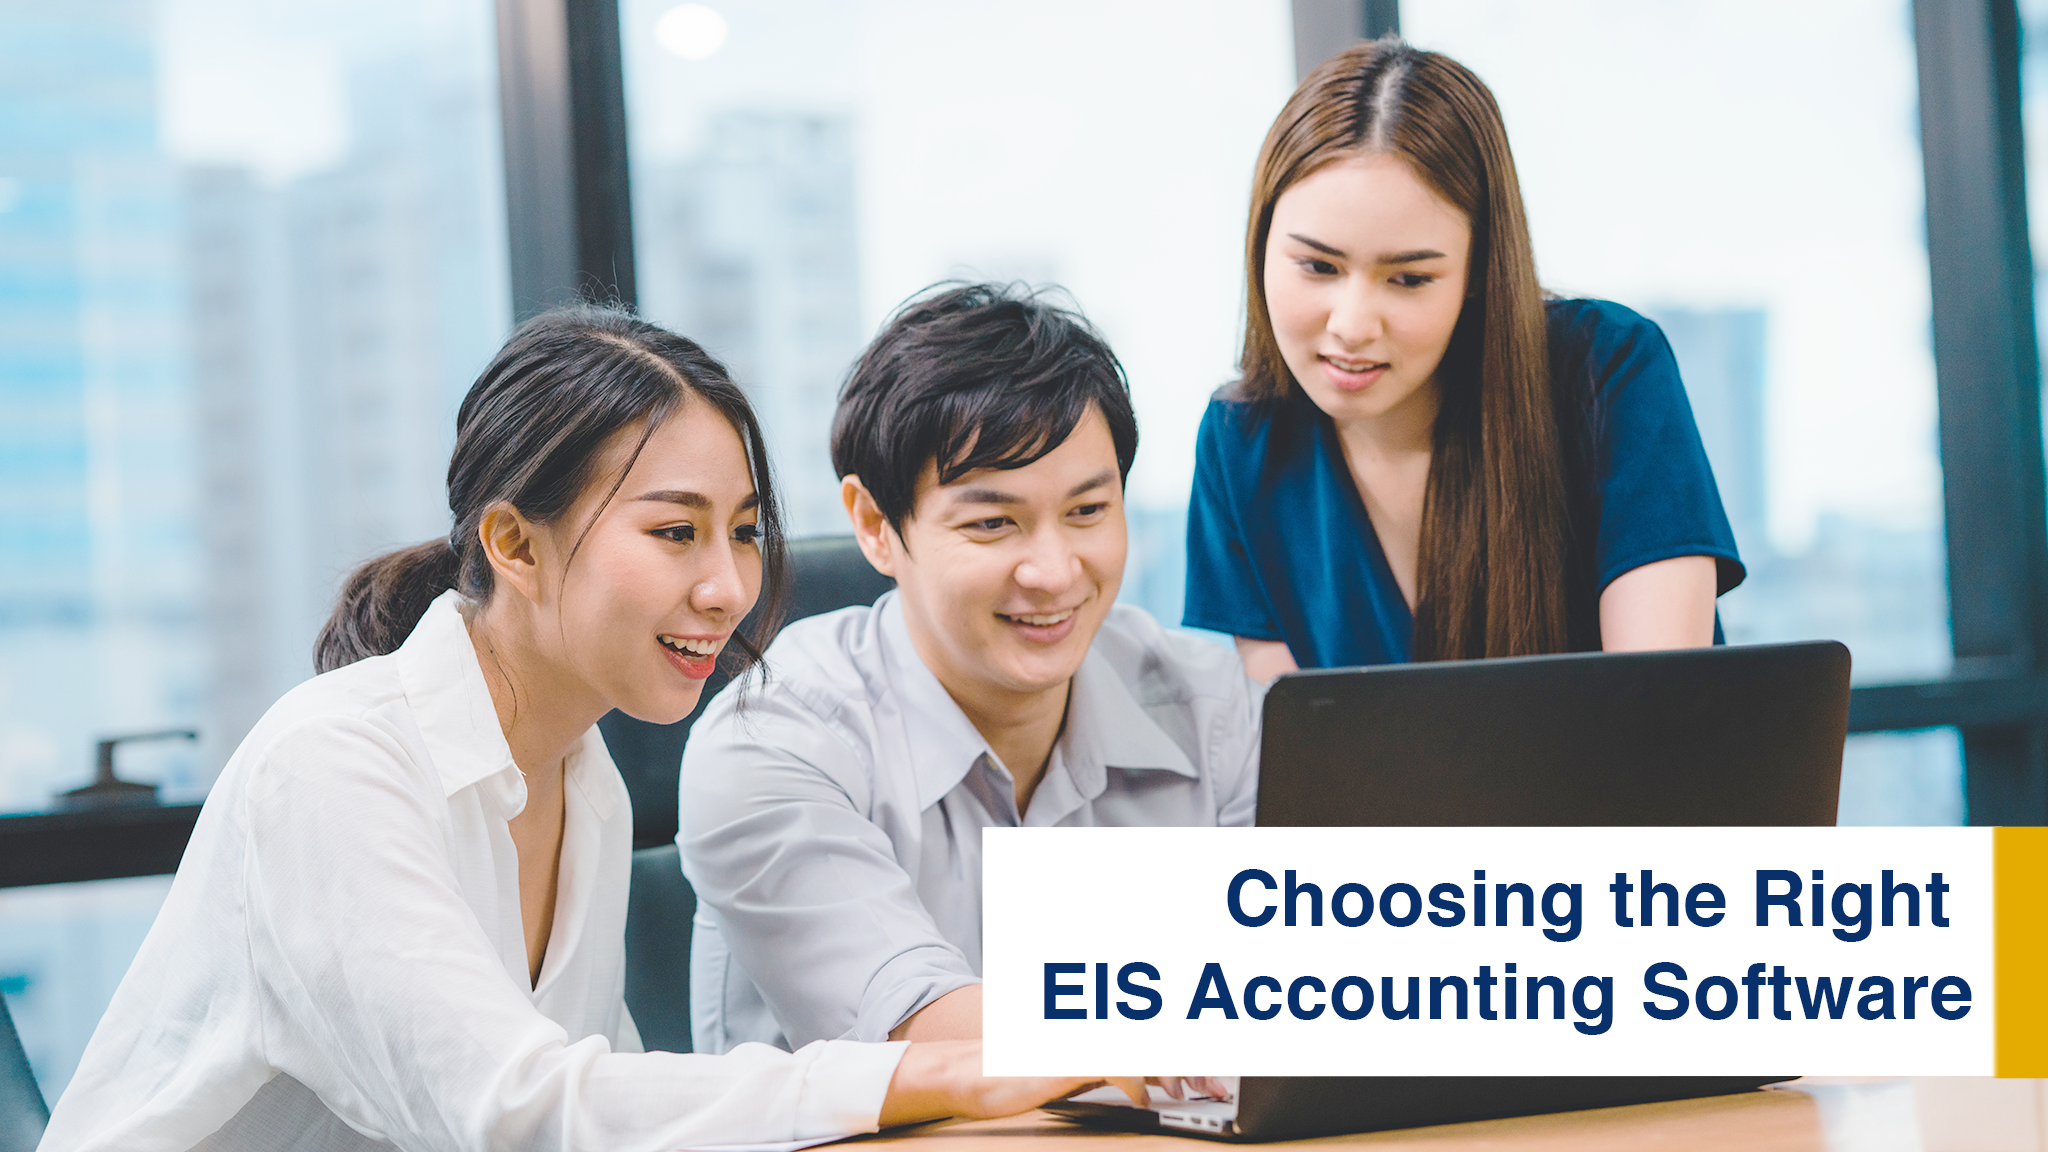 EIS Accounting Software